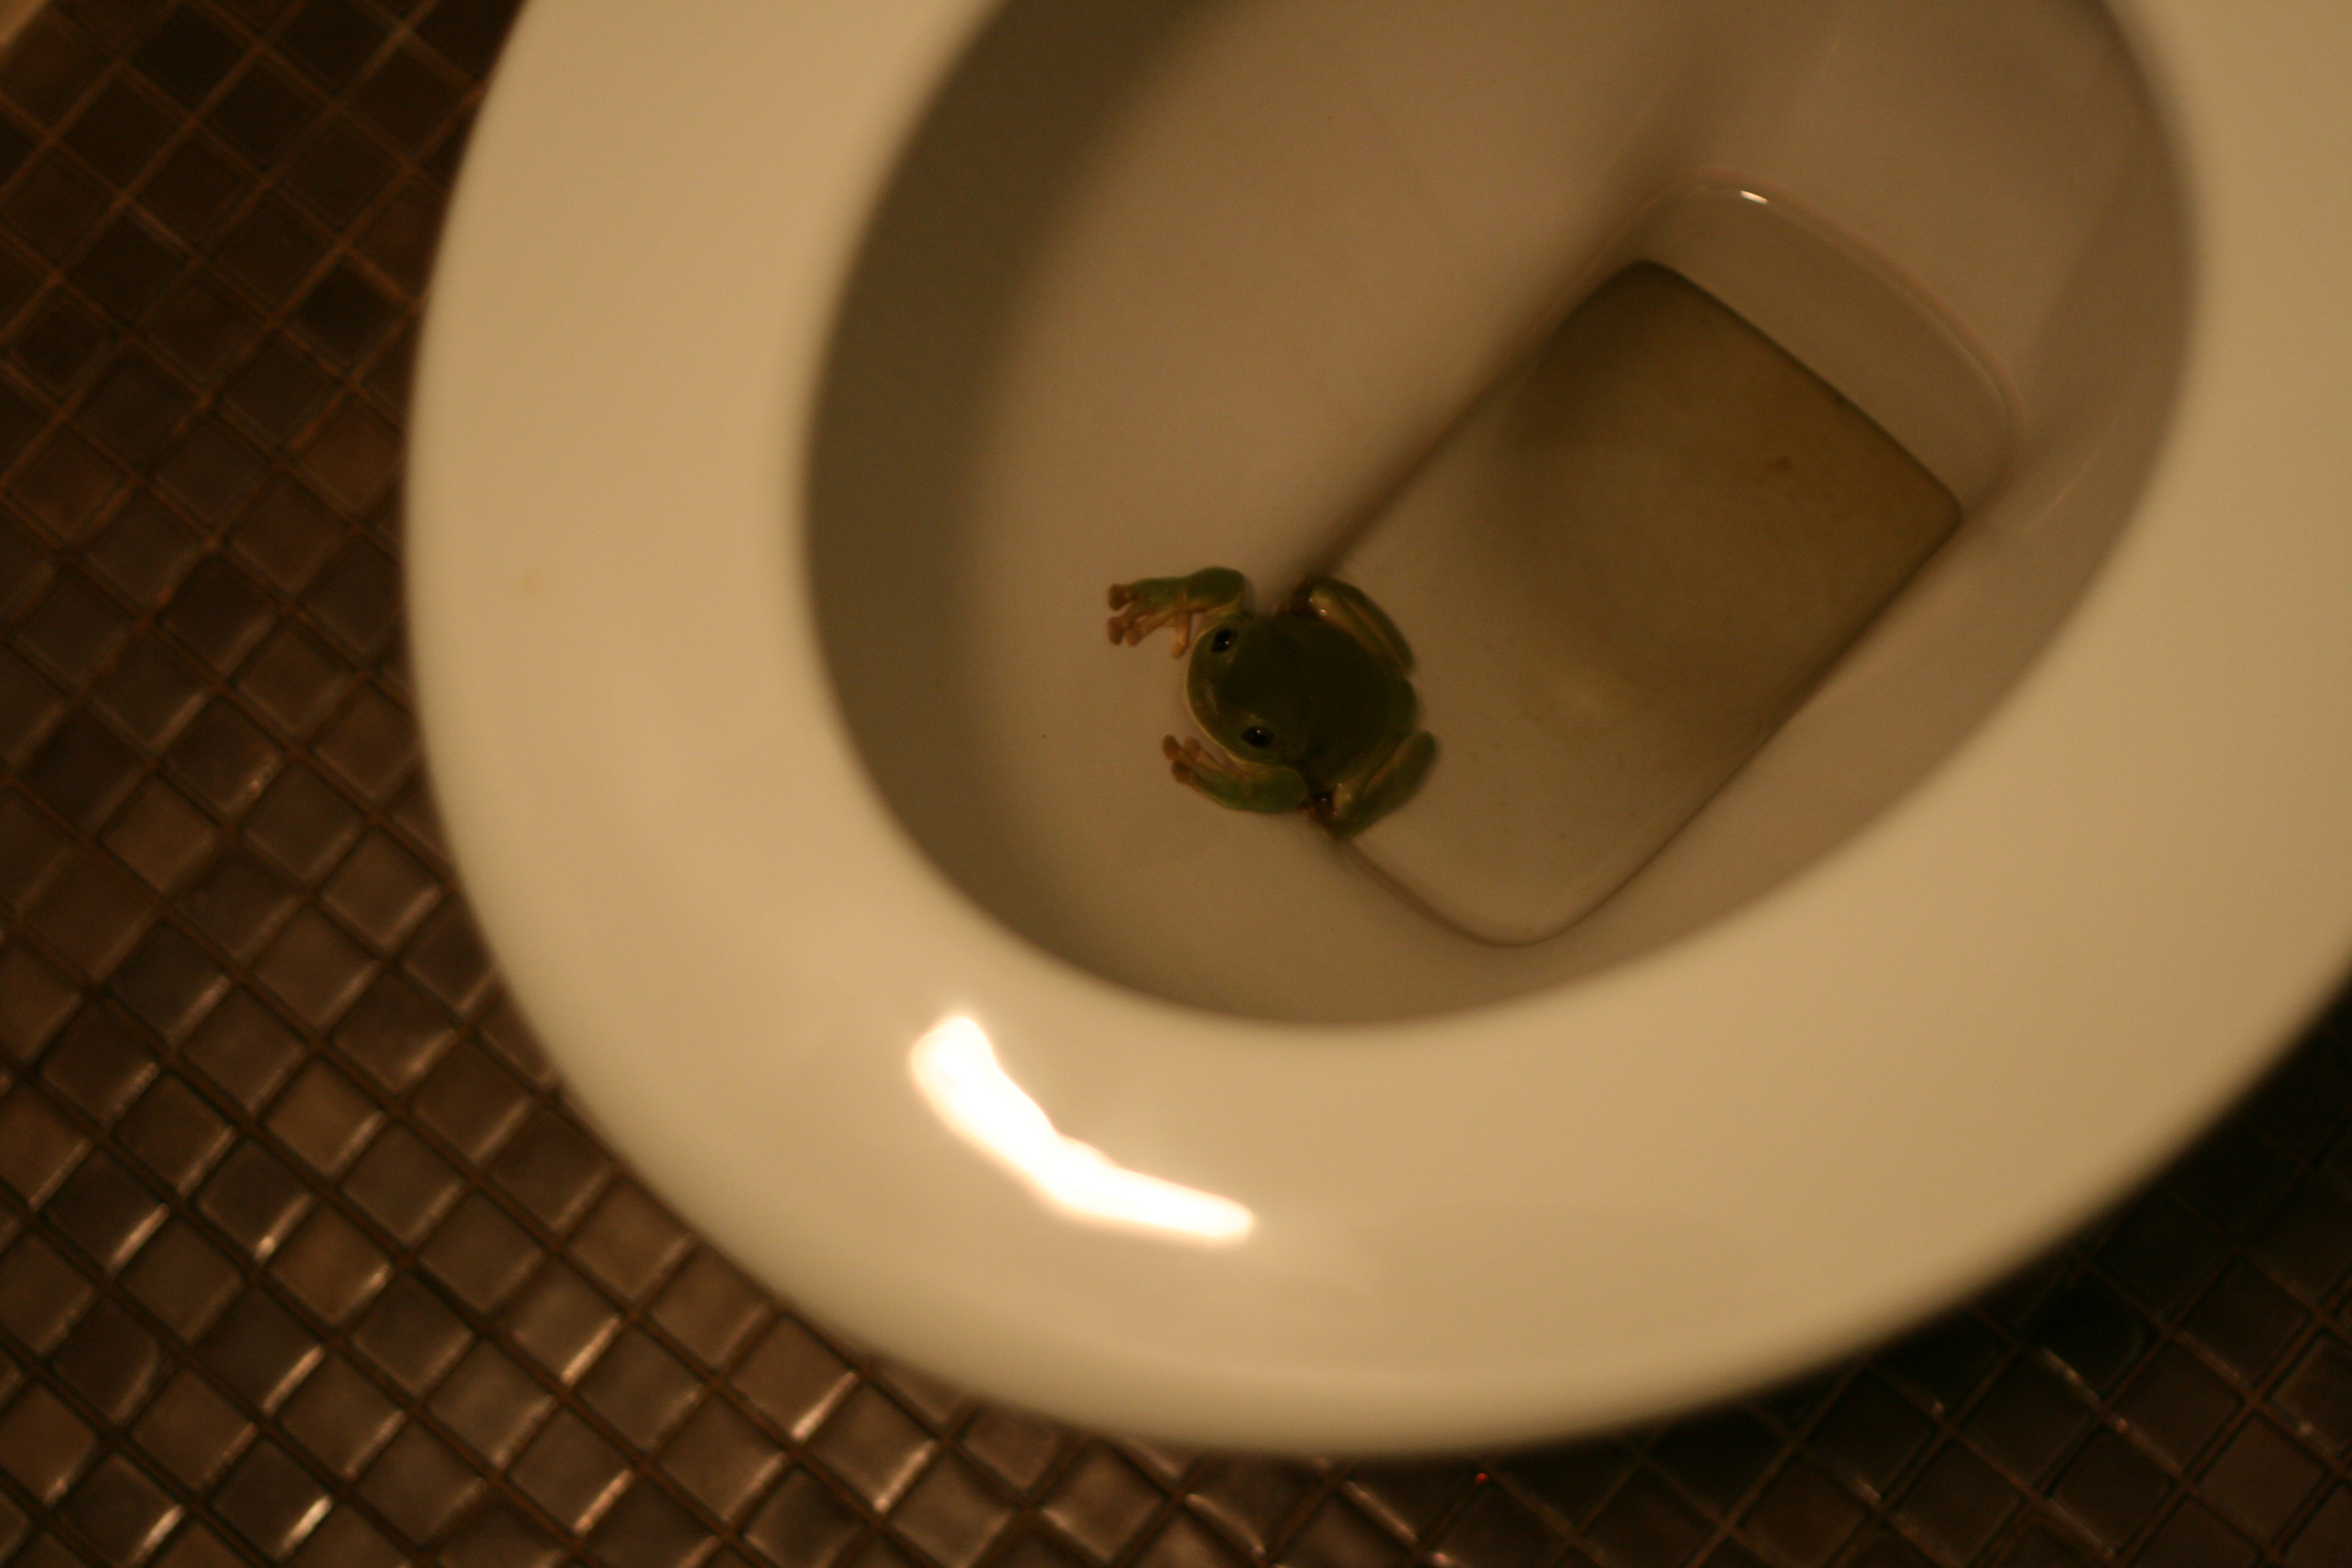 Image result for frog in a toilet pictures